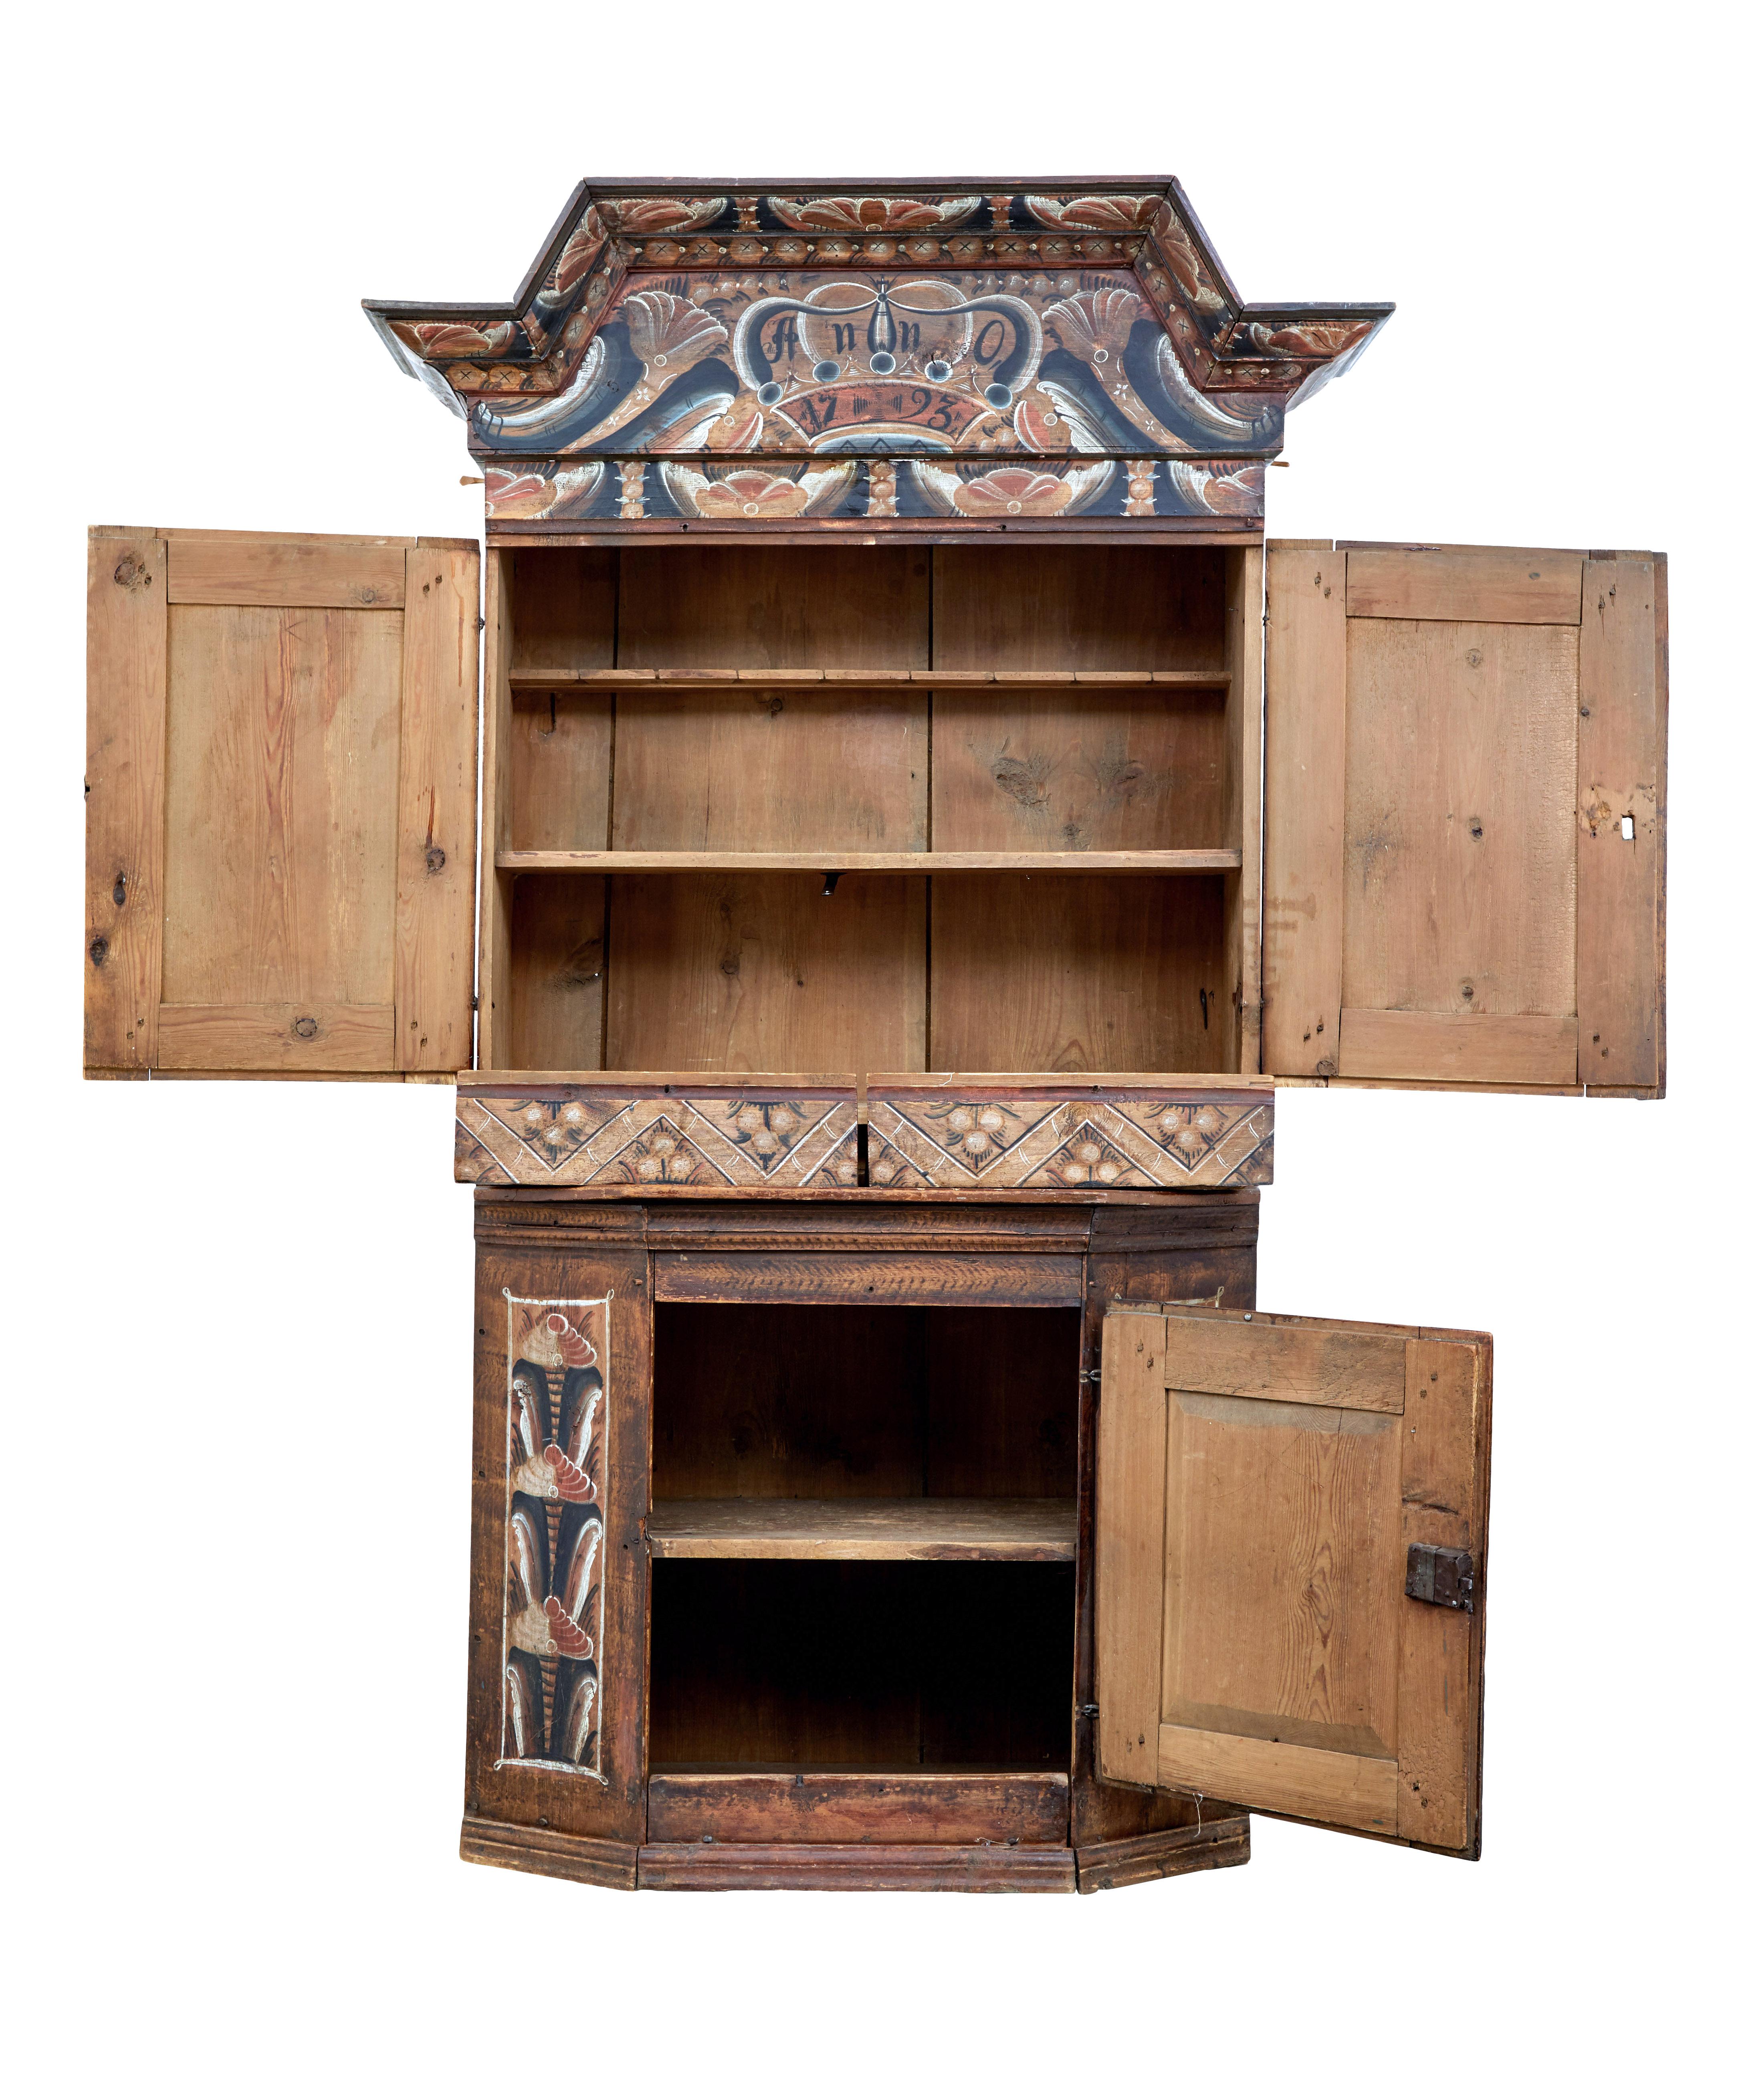 18th century rustic hand painted Swedish cupboard circa 1793.

Beautiful 3 part shaped Folk Art cupboard from the late 18th century. 3 parts consisting of removable cornice, top and bottom sections.

Hand painted and dated 1793. Double door